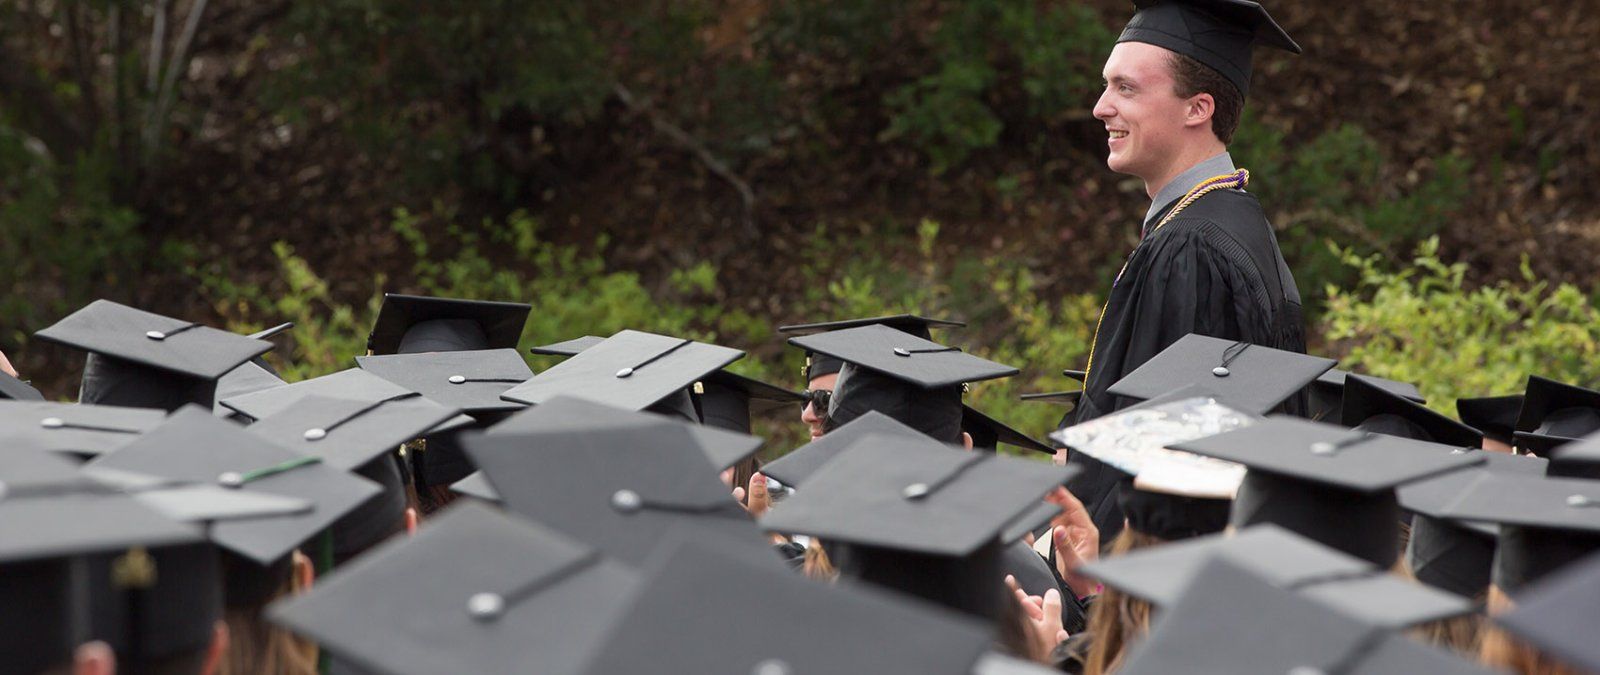 PLNU student Nick, rises to receive his diploma at PLNU's undergraduate commencement ceremony.